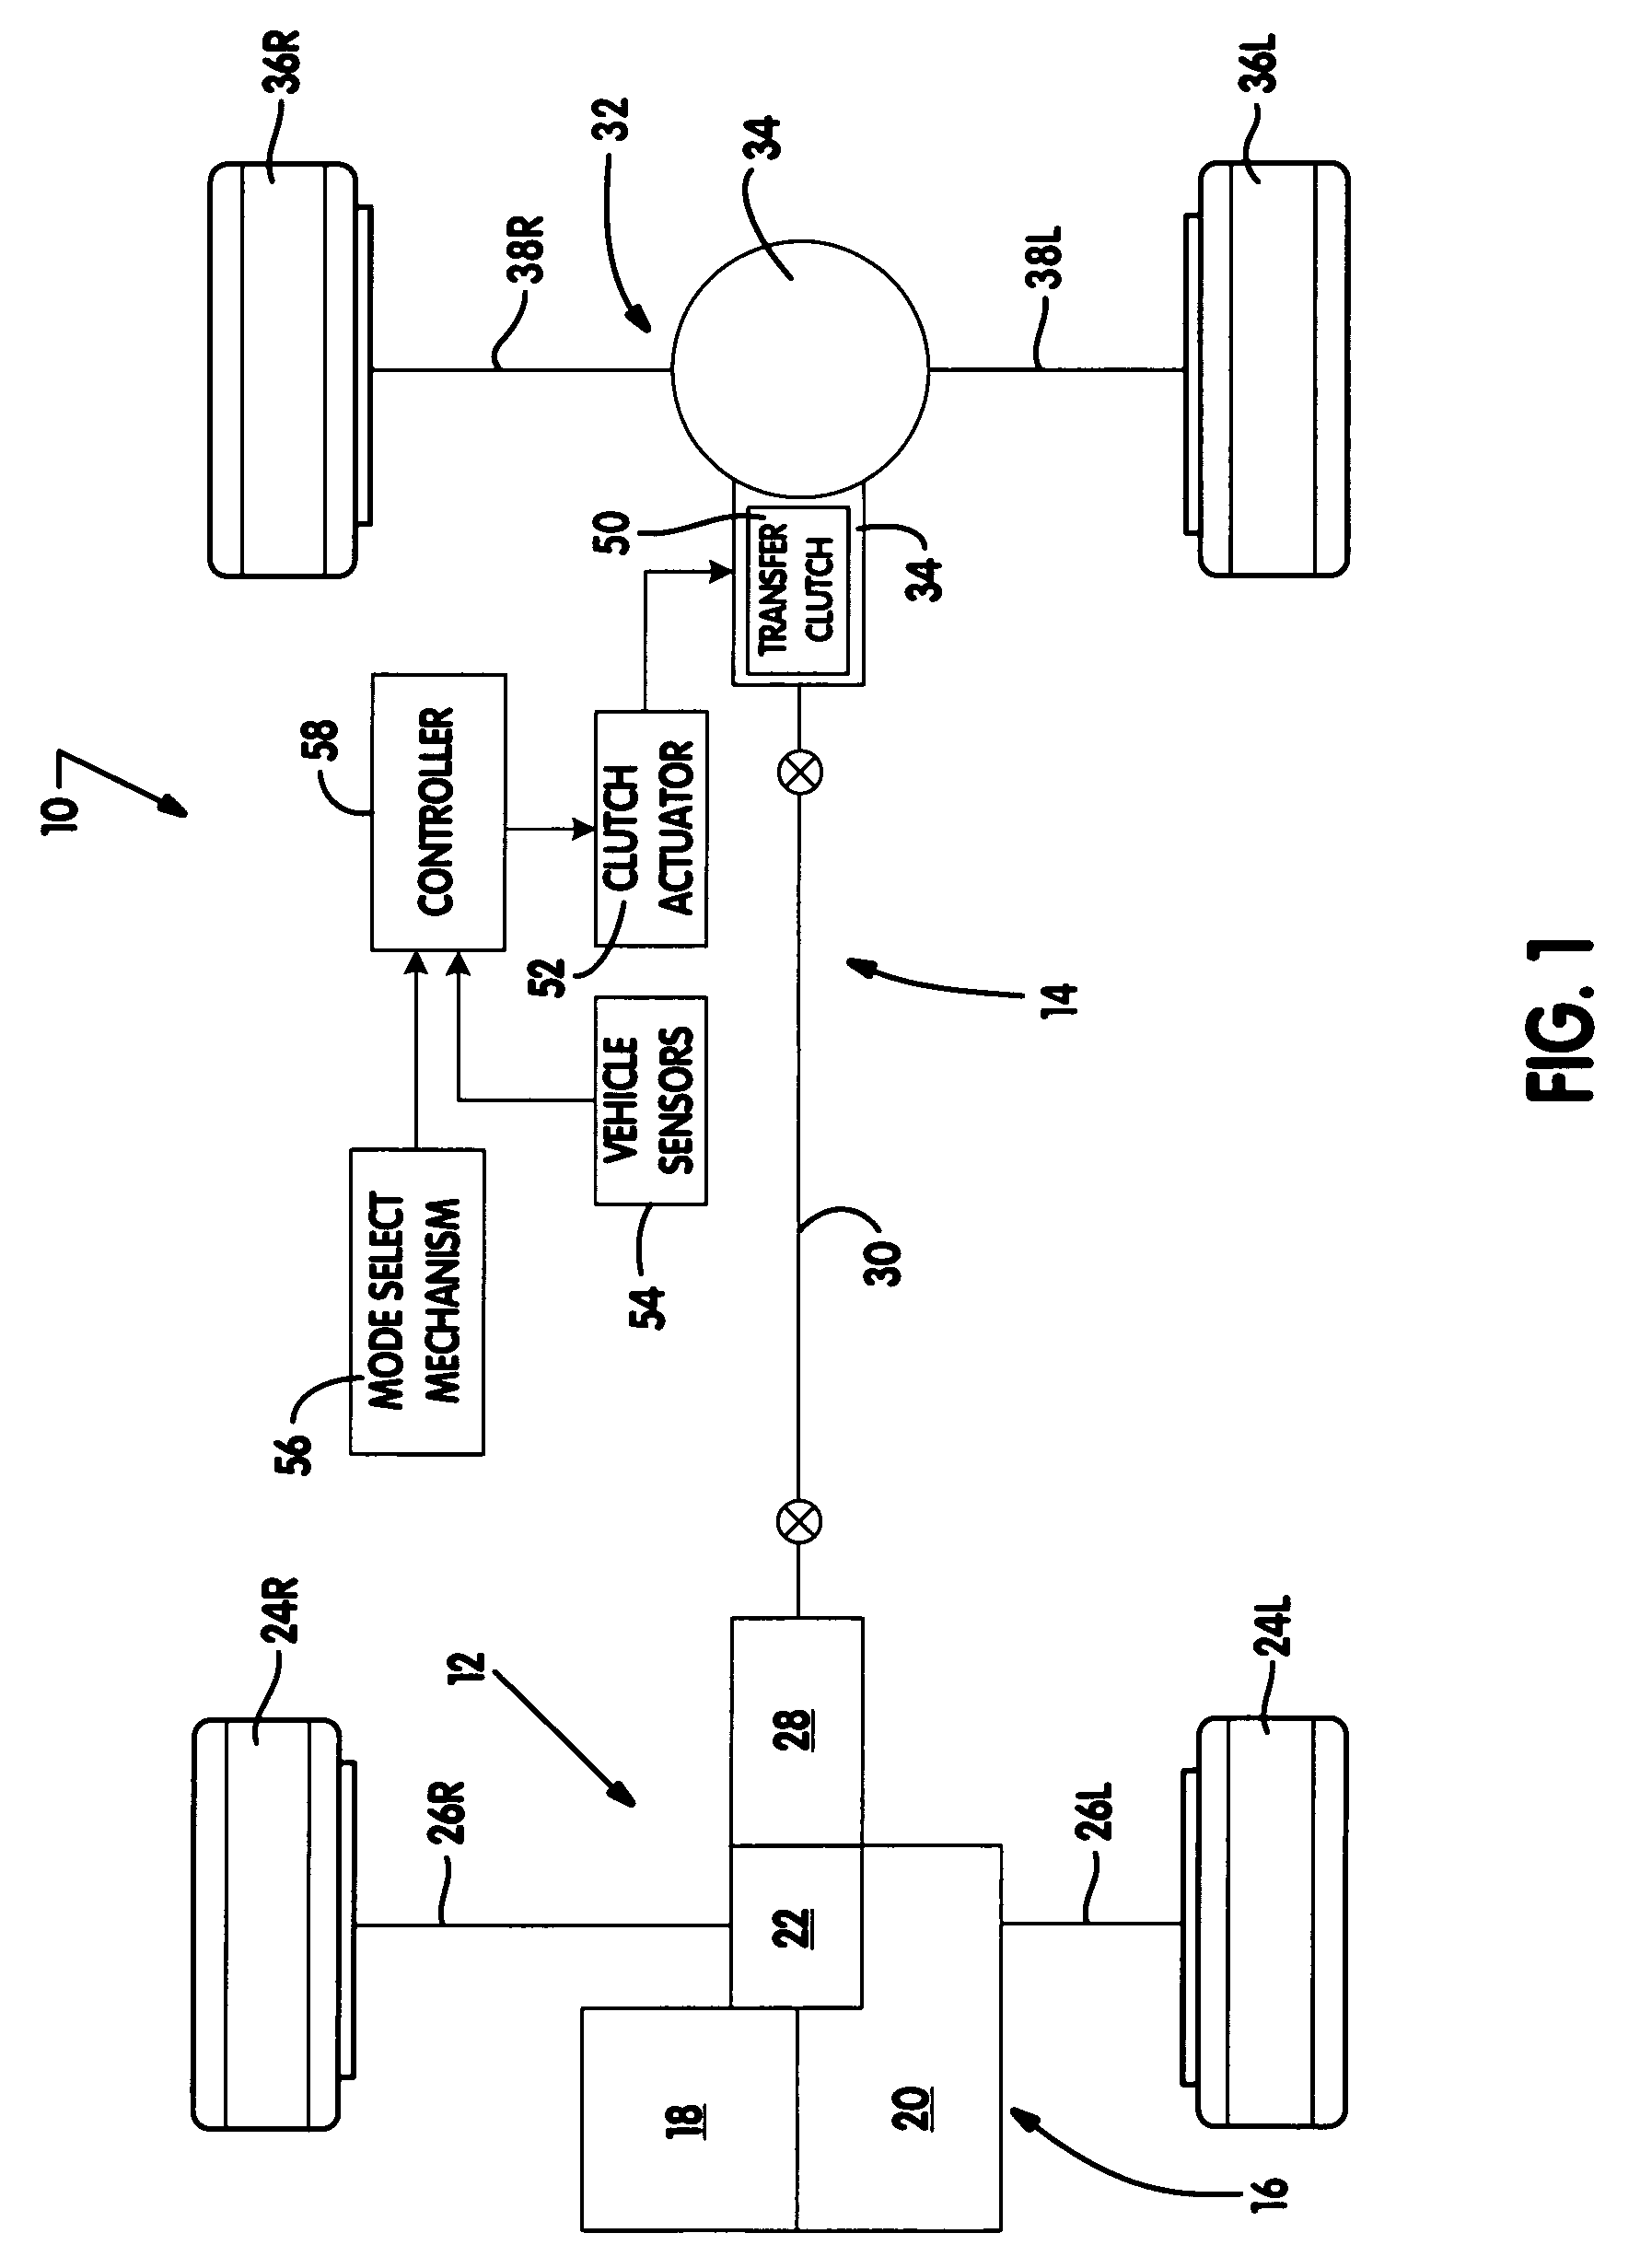 Power-operated clutch actuator for torque transfer mechanisms